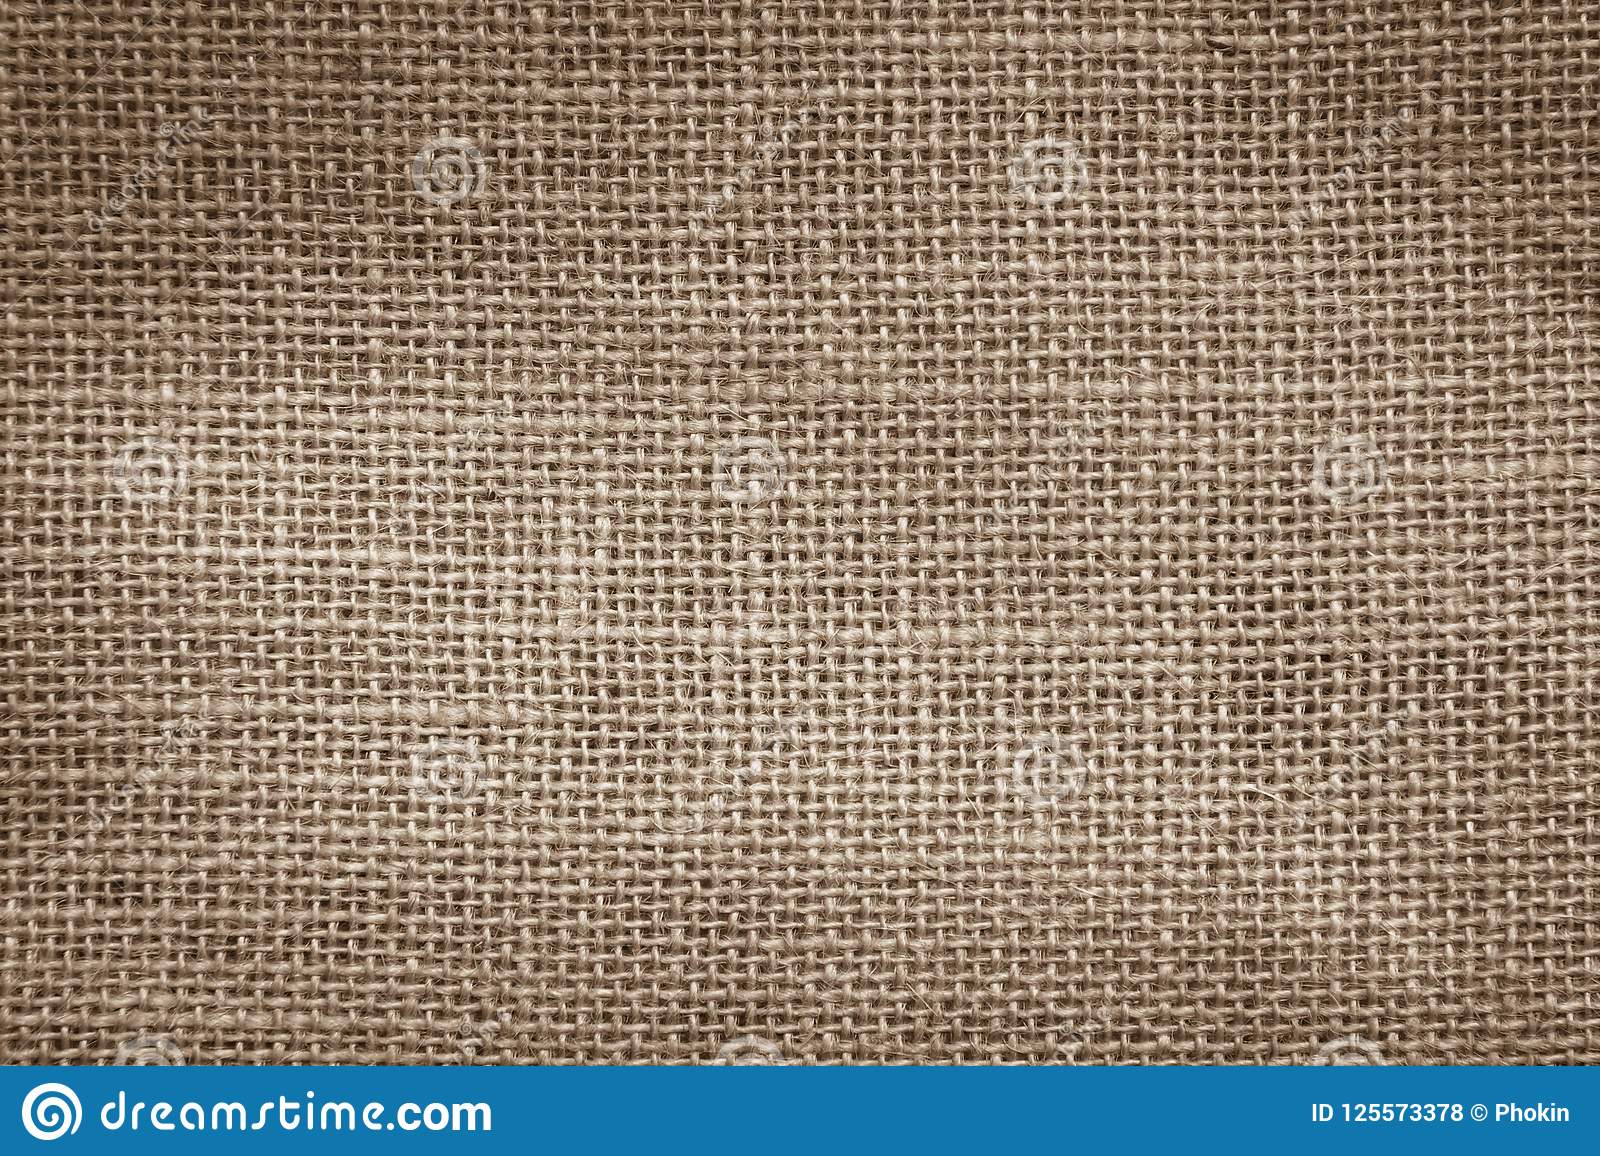 Pastel Abstract Hessian Or Sackcloth Fabric Or Hemp - Woven Fabric - HD Wallpaper 